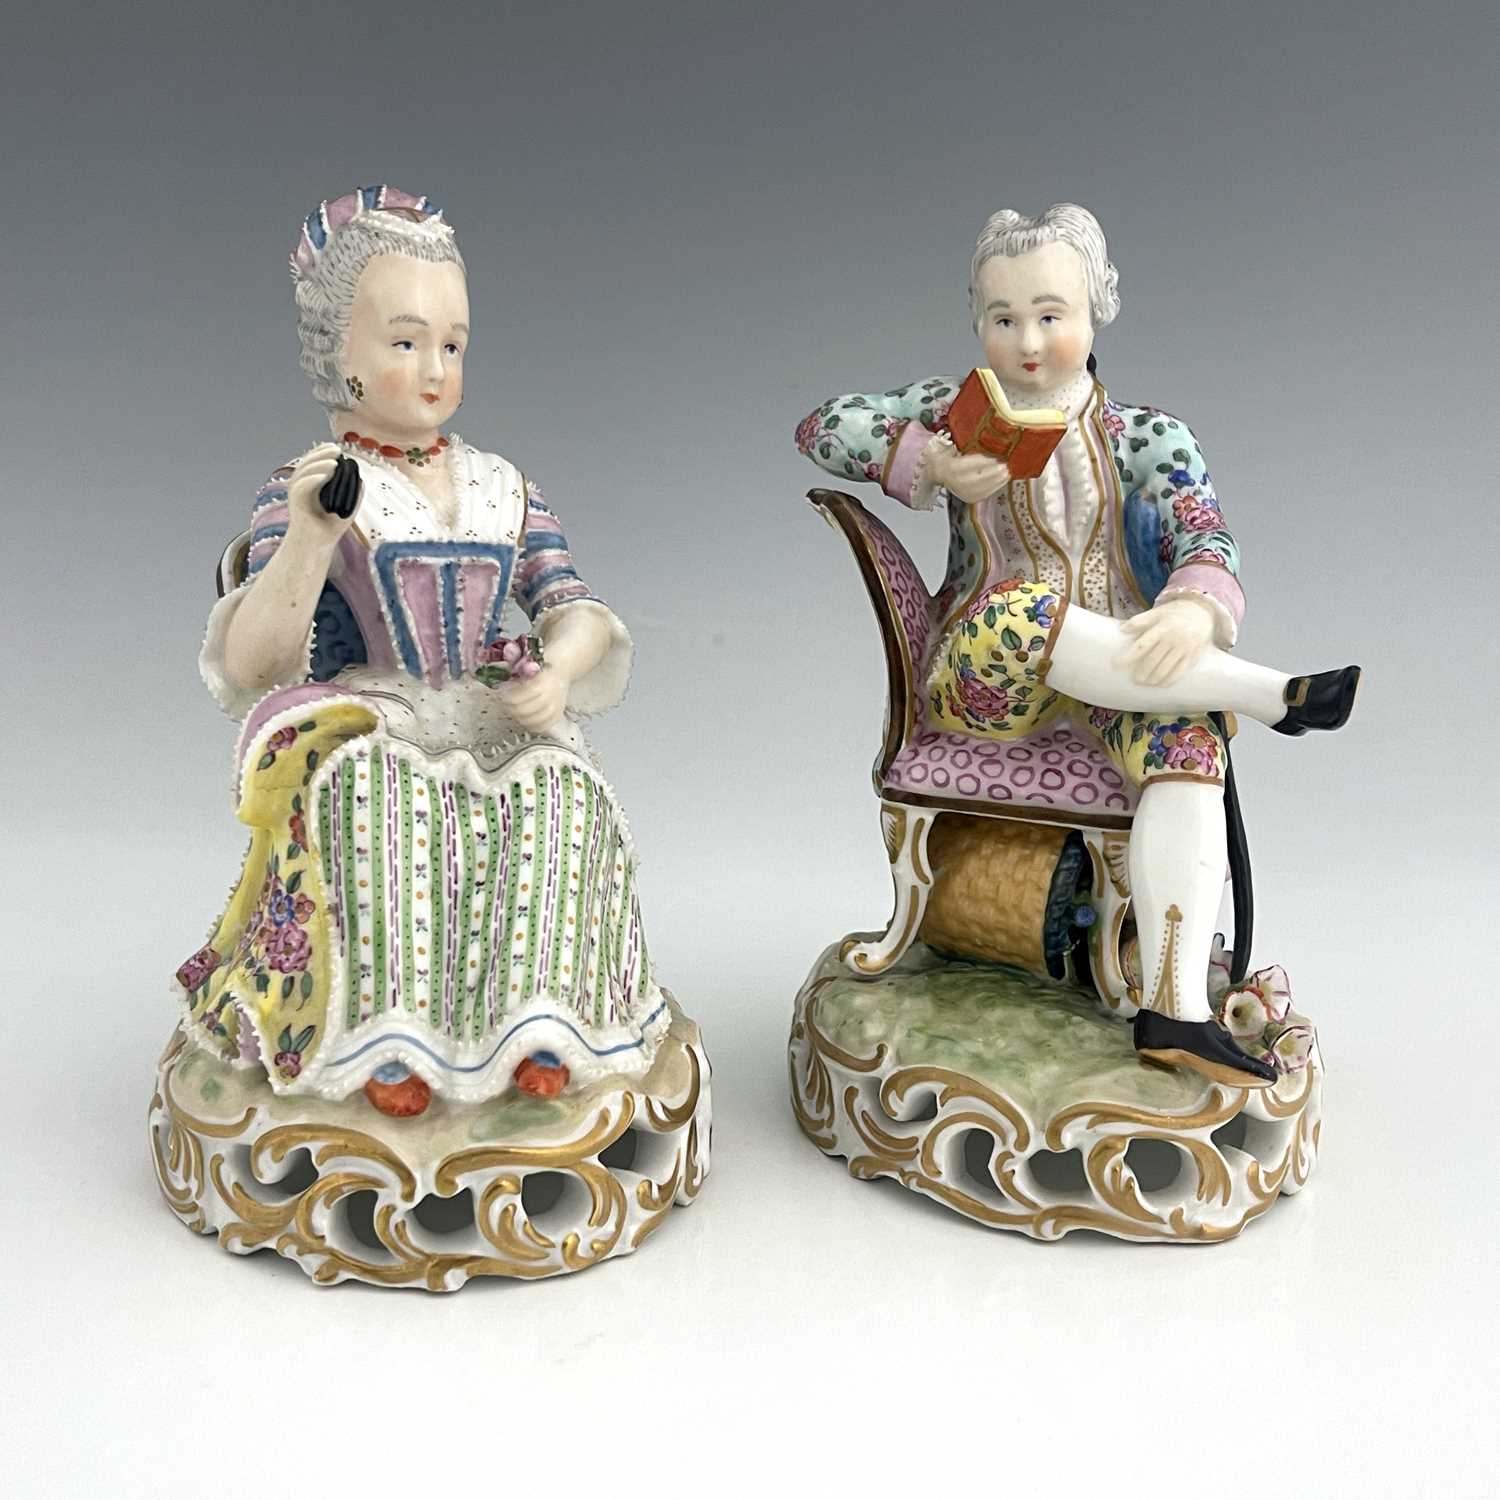 A pair of Meissen type figures, probably late 18th century, model 137, modelled as a seated woman